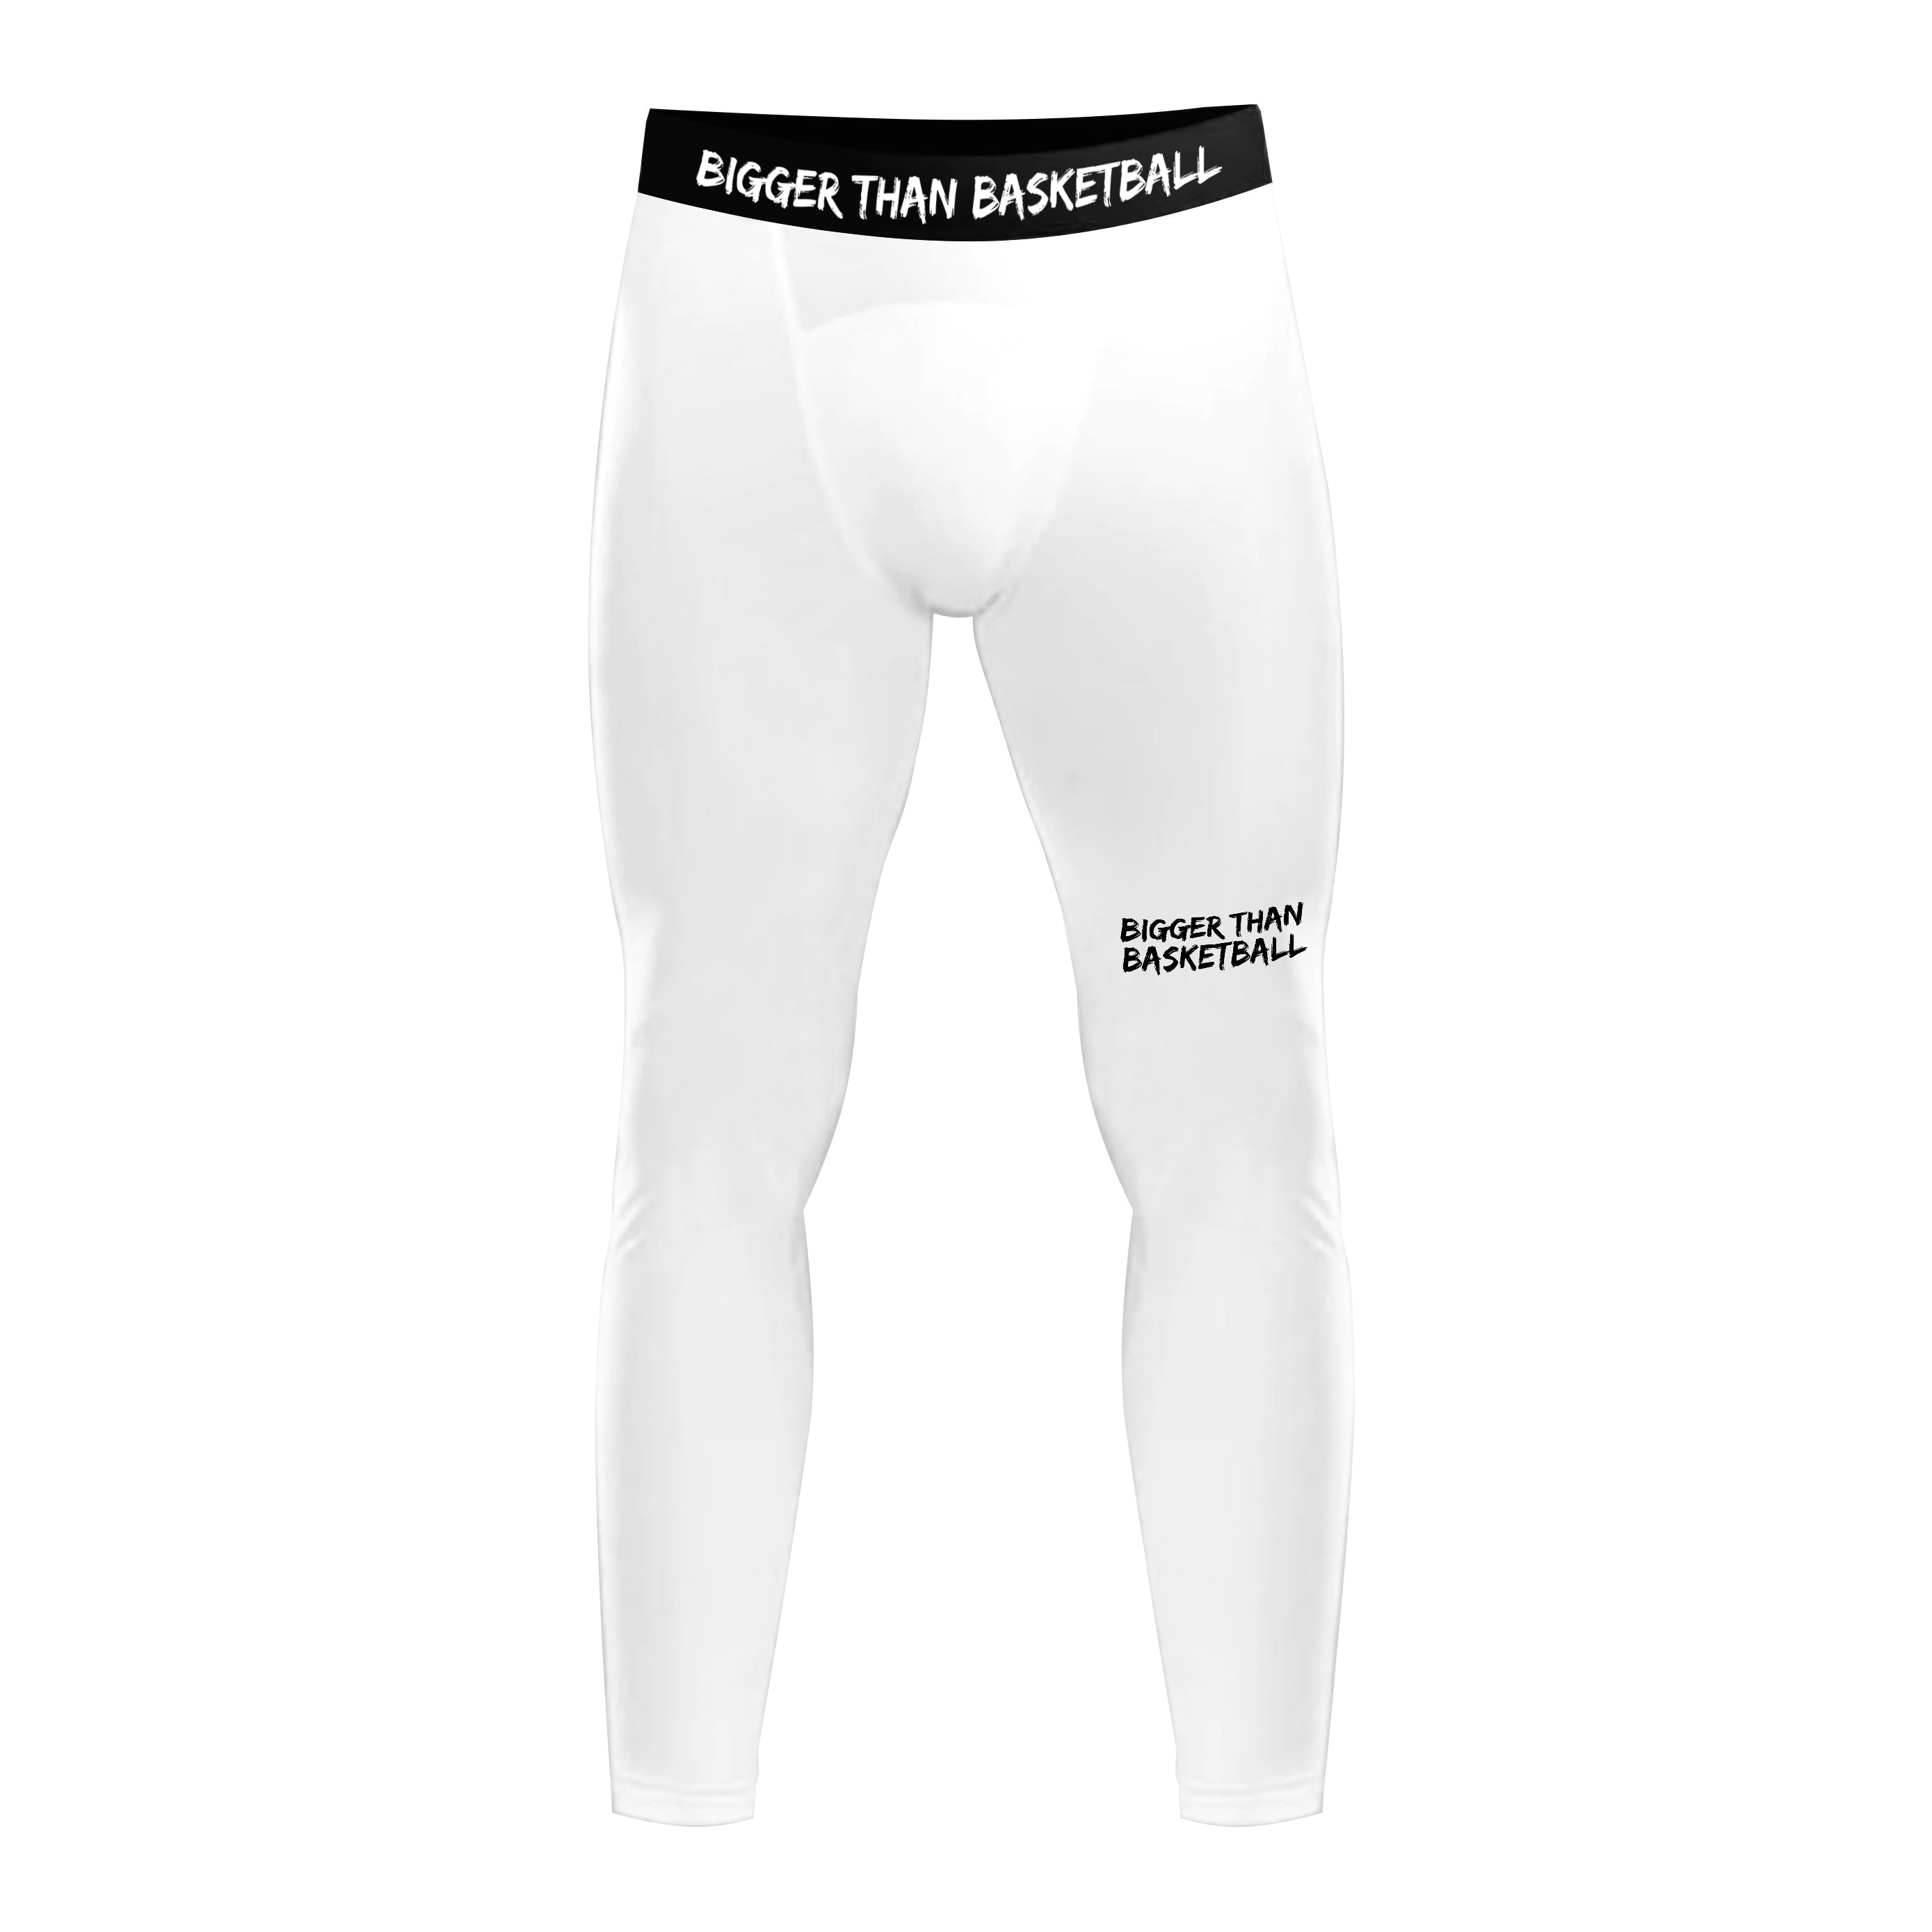 One Leg 3/4 Compression Tights (White) - For Basketball, Football &  Lacrosse | eBay